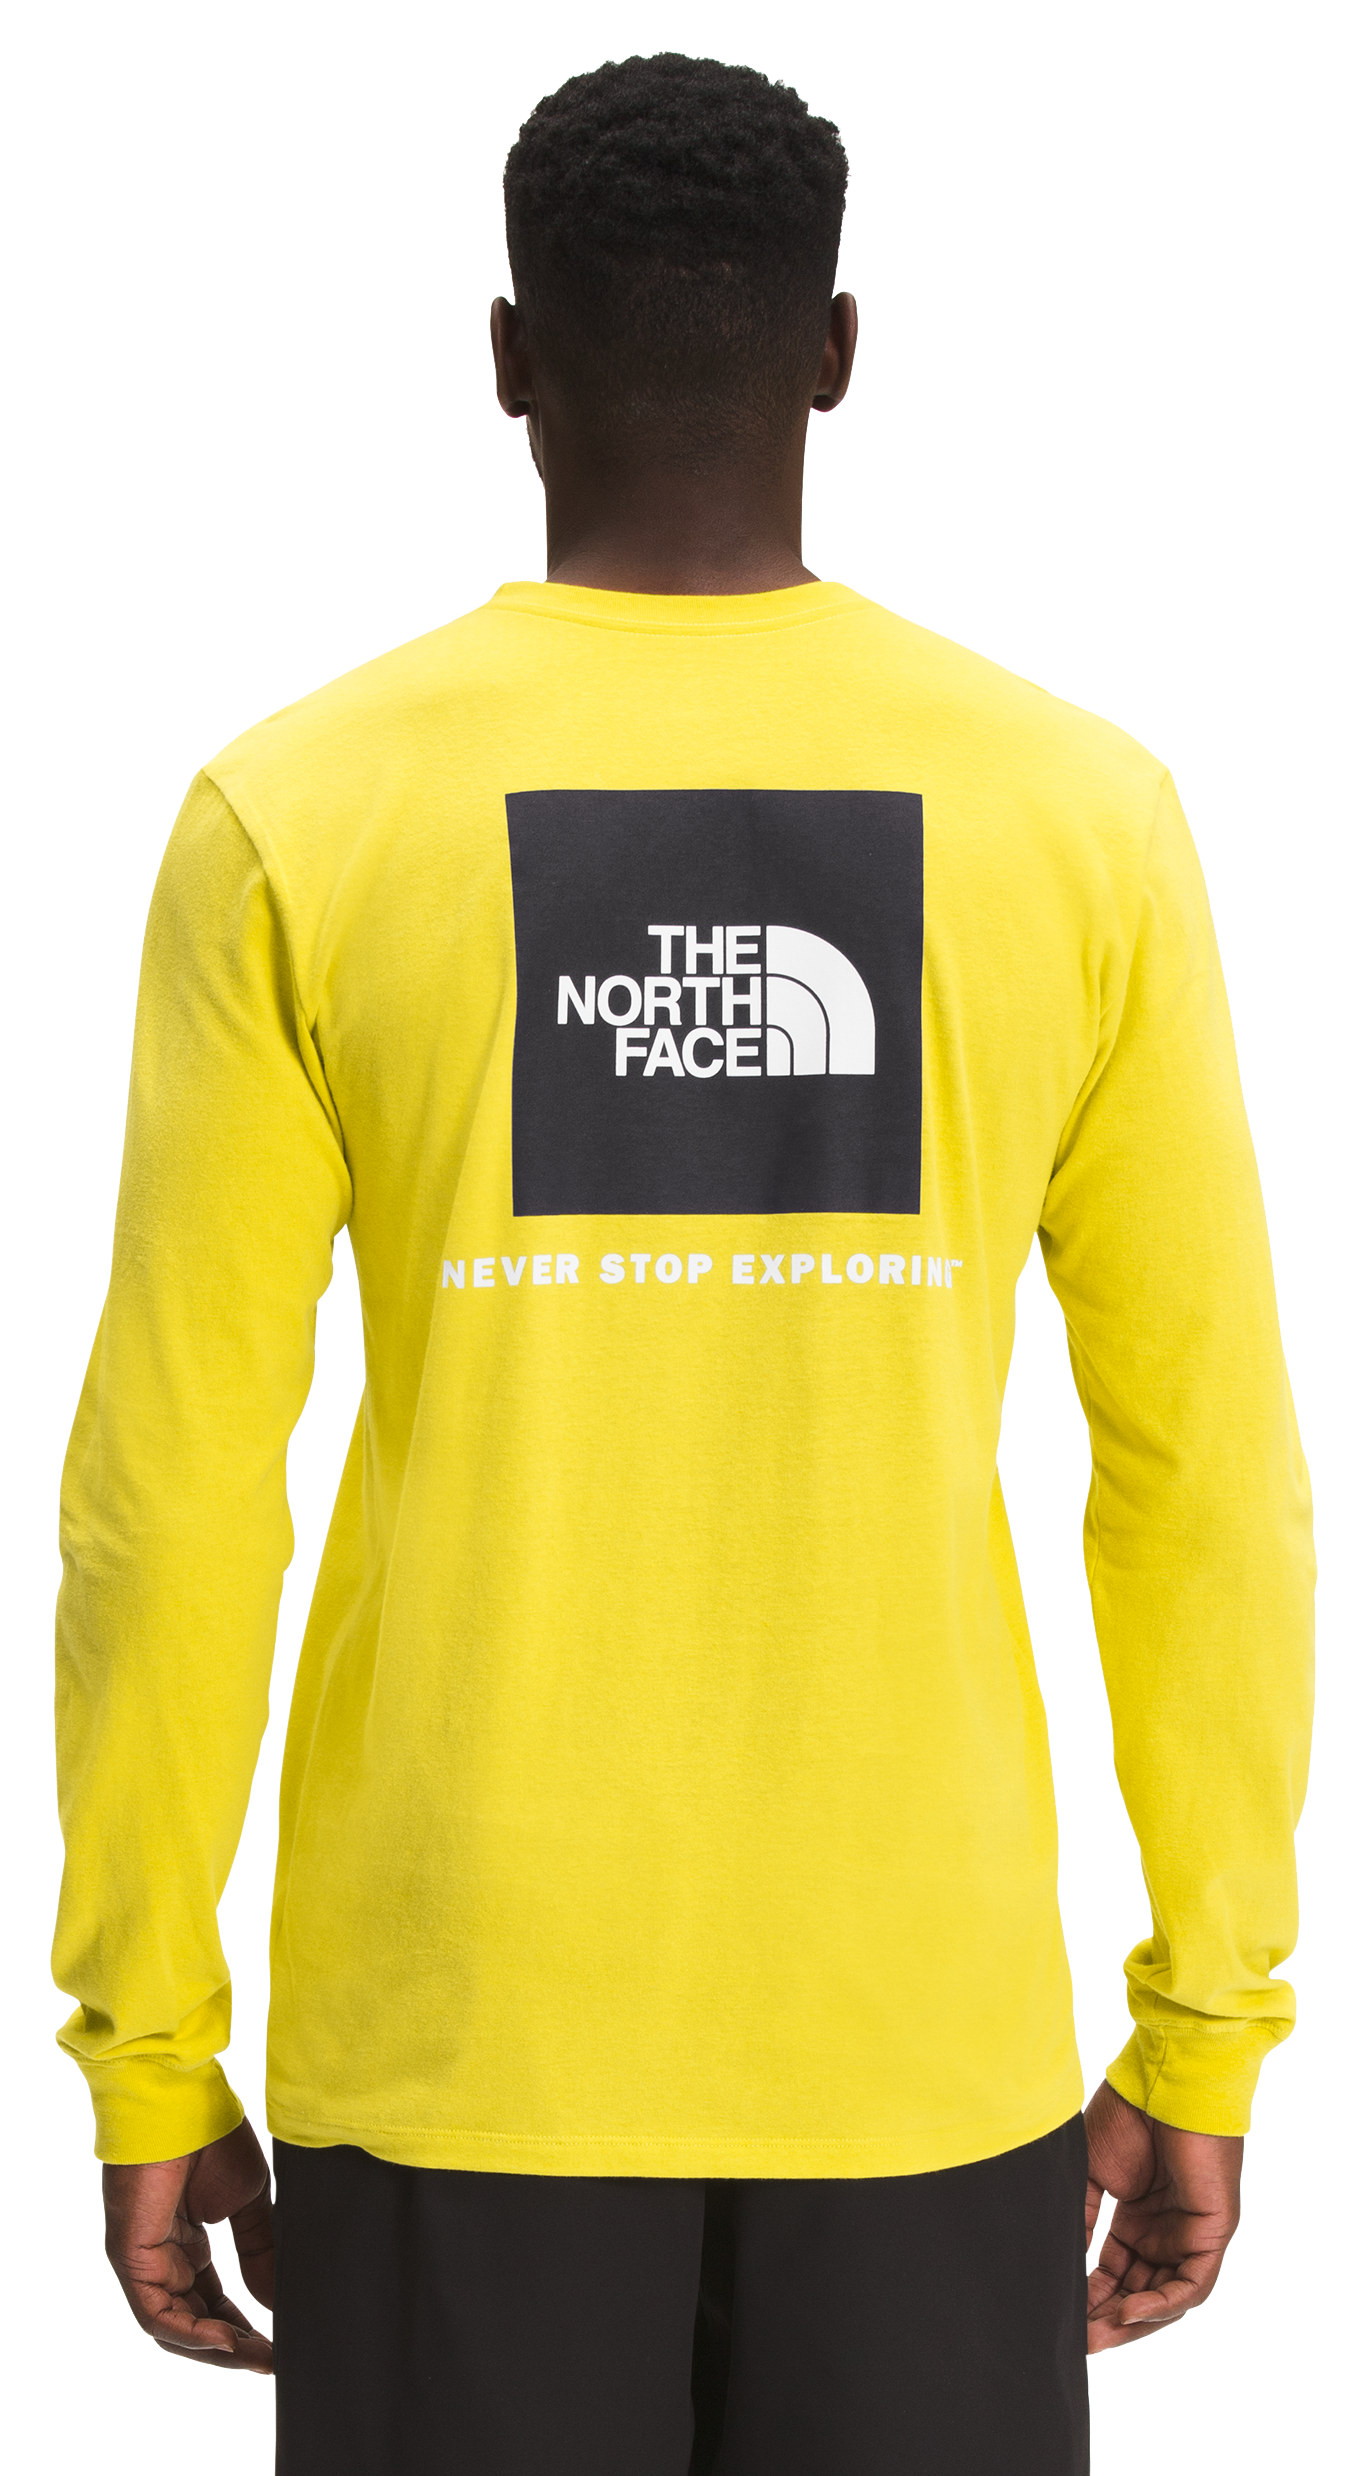 The North Face Box NSE Long-Sleeve Shirt for Men - Acid Yellow/TNF Black - M